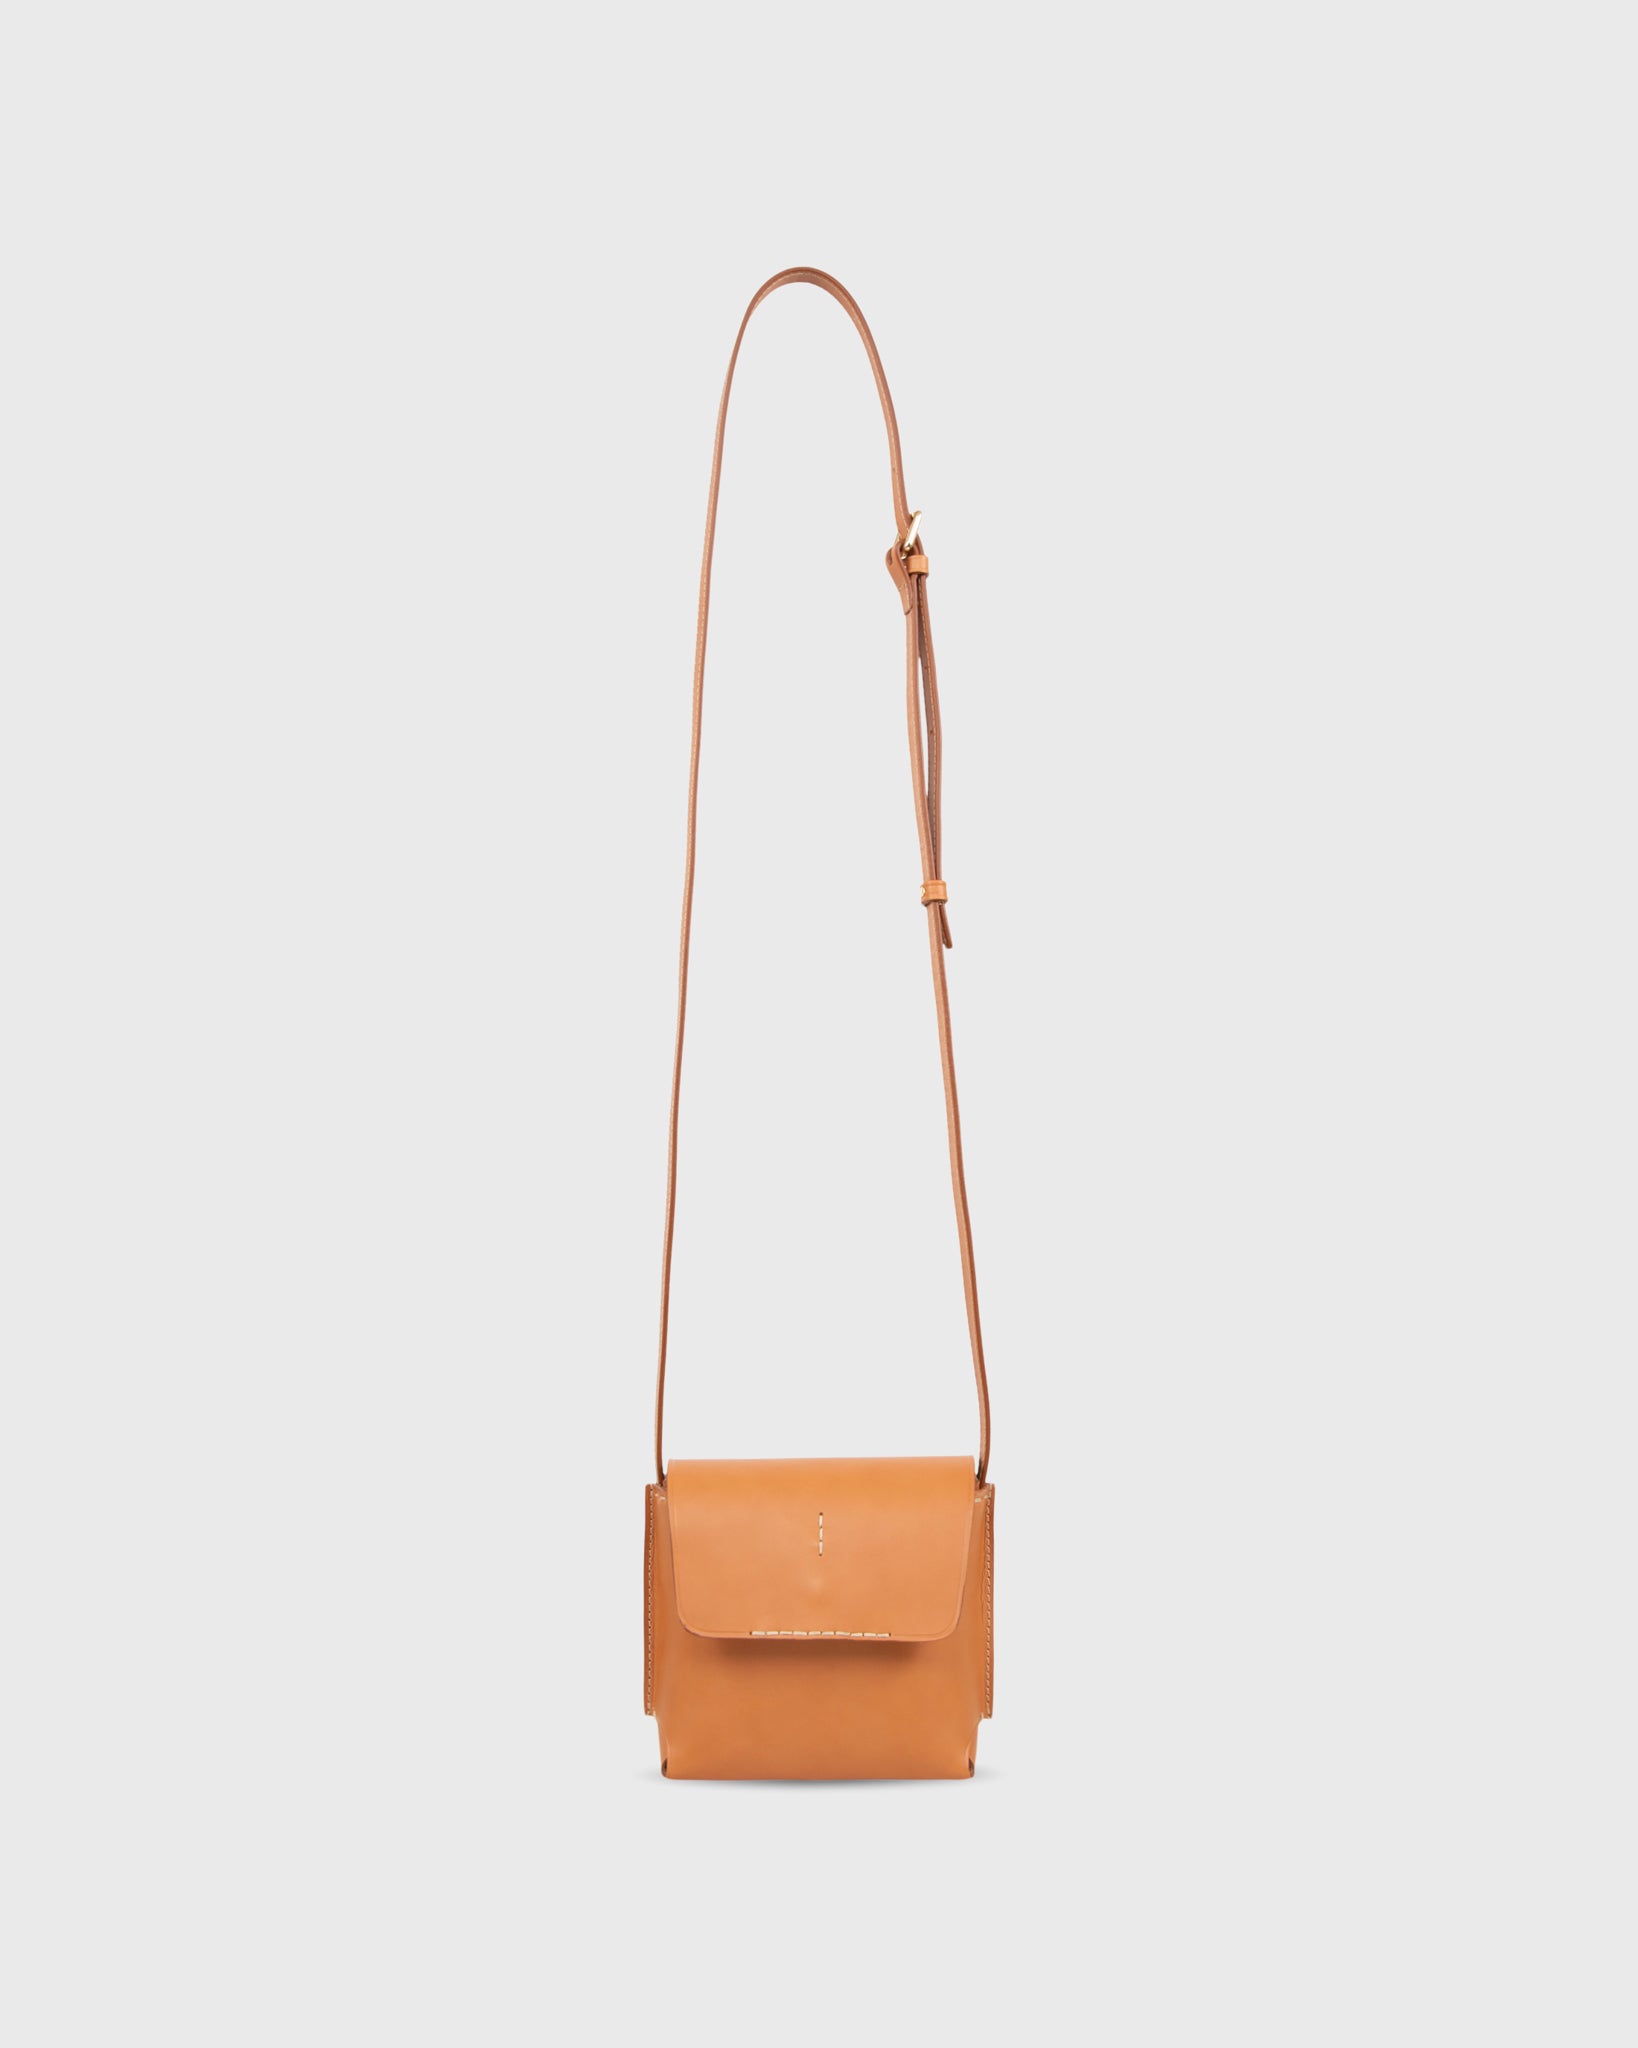 Lucette Crossbody Bag in Tan Leather